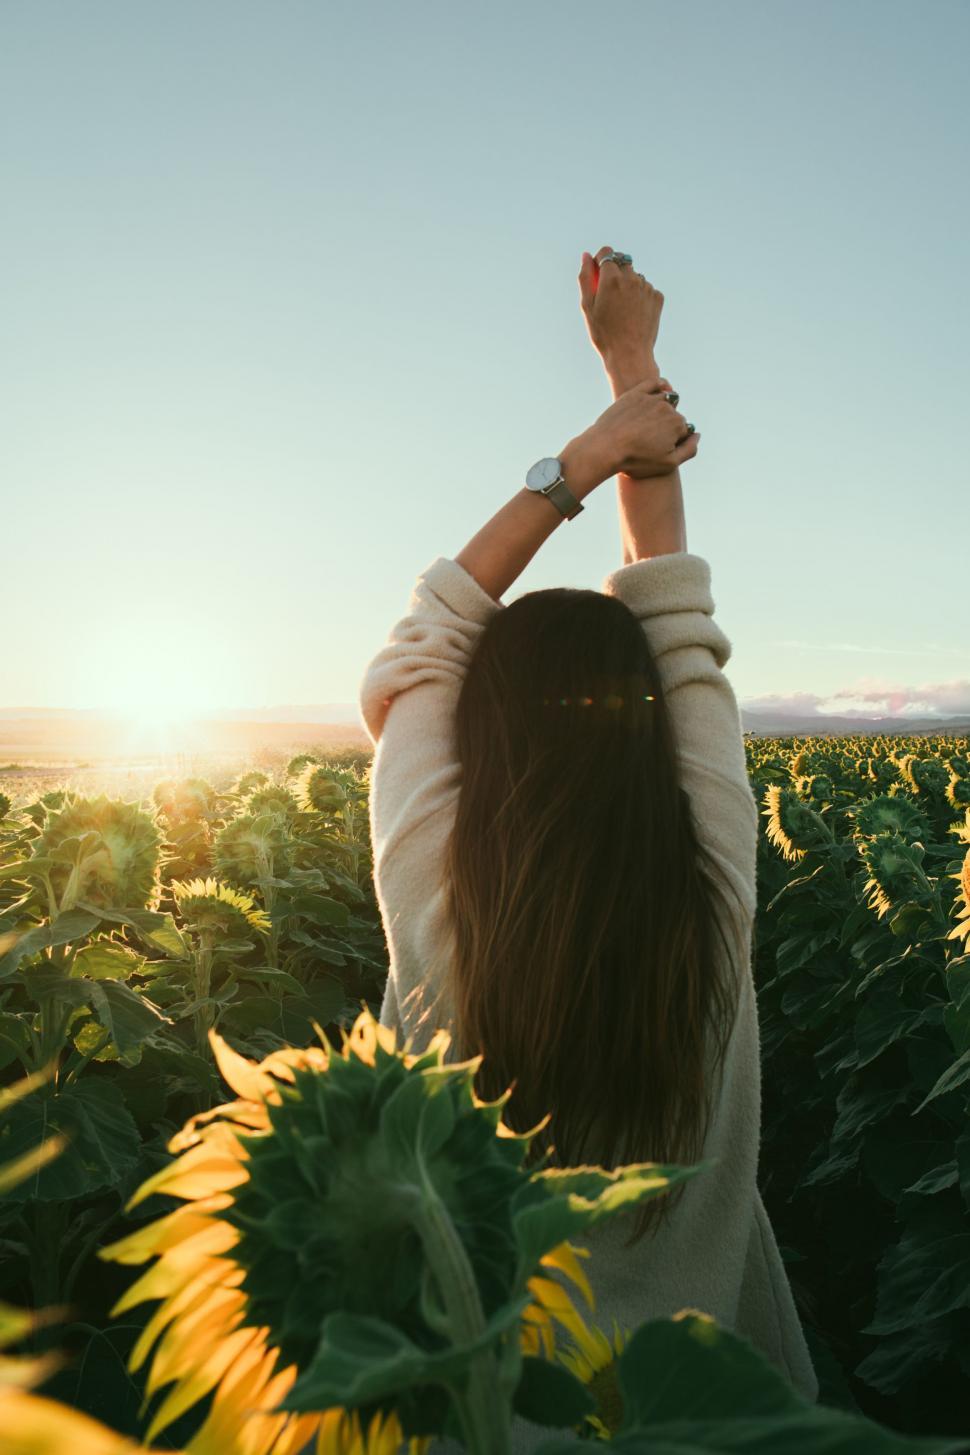 Free Image of Woman Standing in Field of Sunflowers 